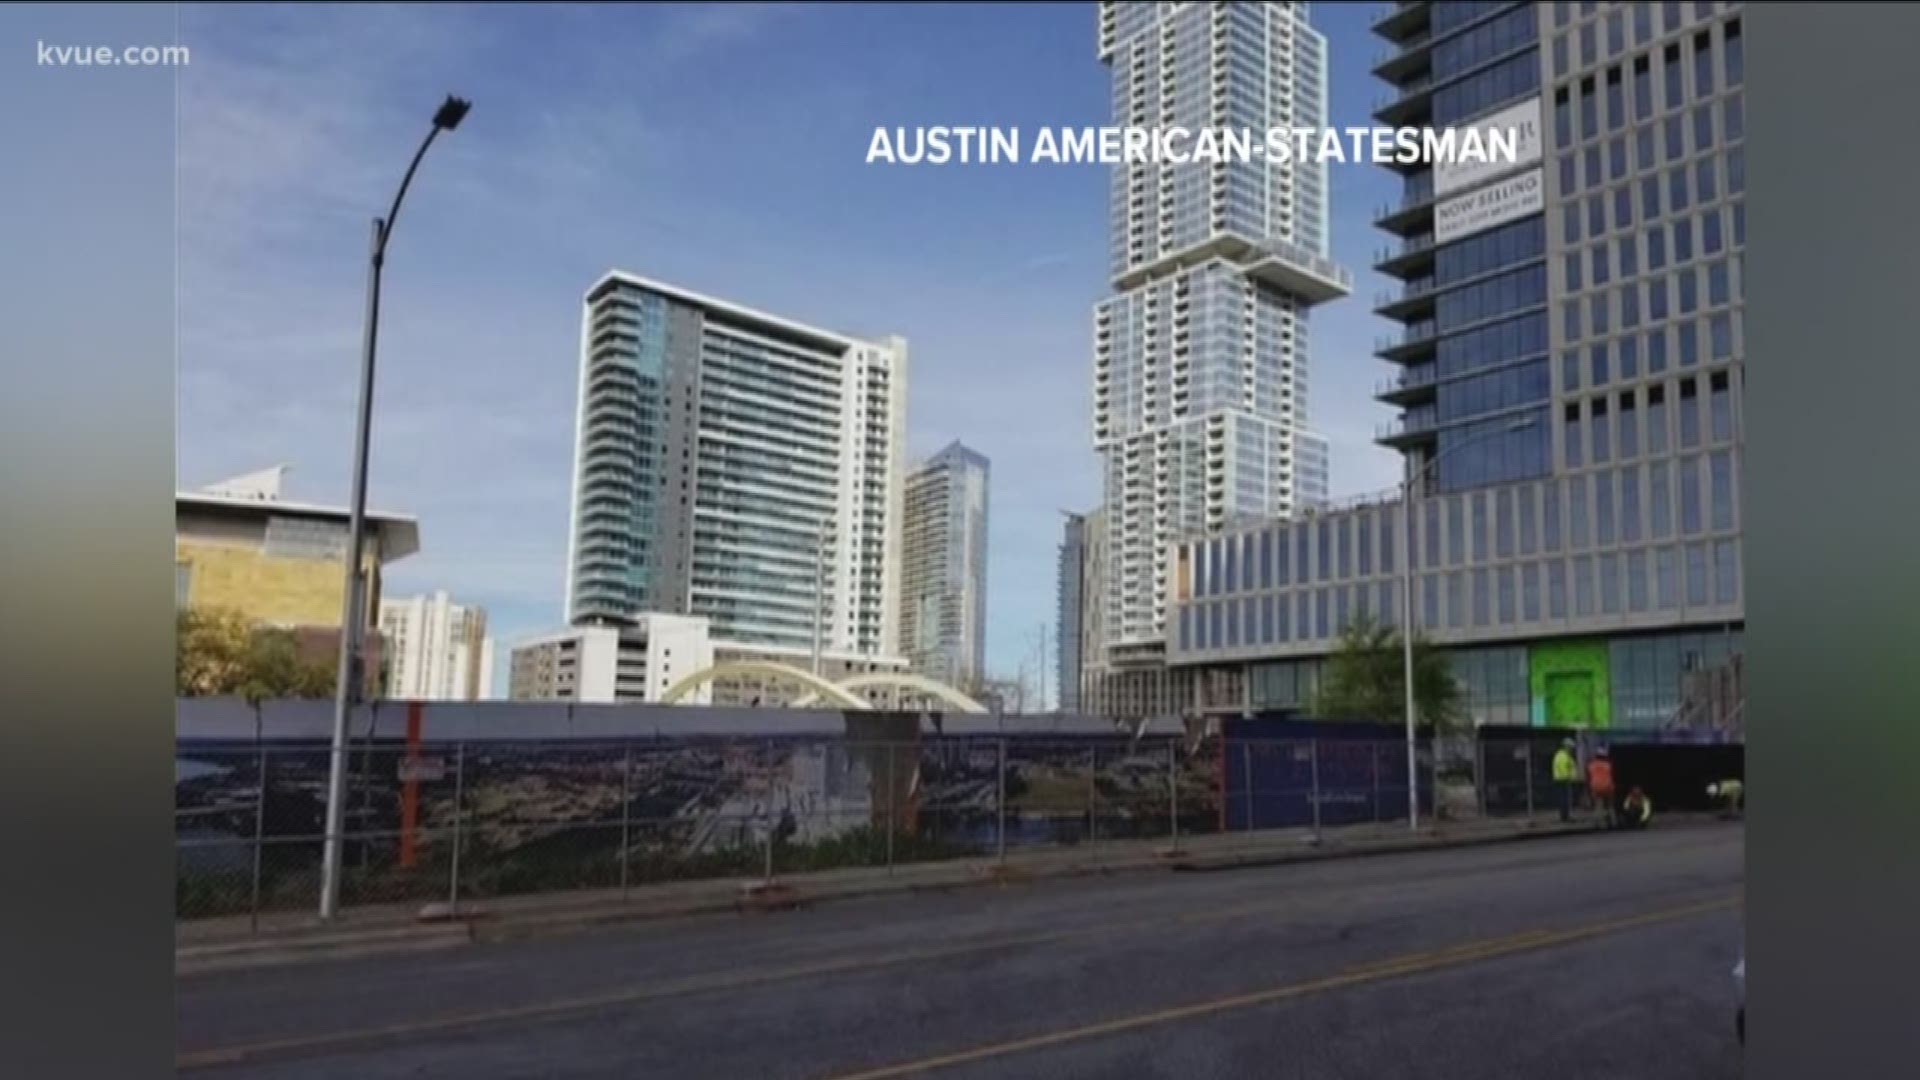 According to our partners at the Austin American-Statesman, Google signed a lease for a 35-story tower that is being built downtown.